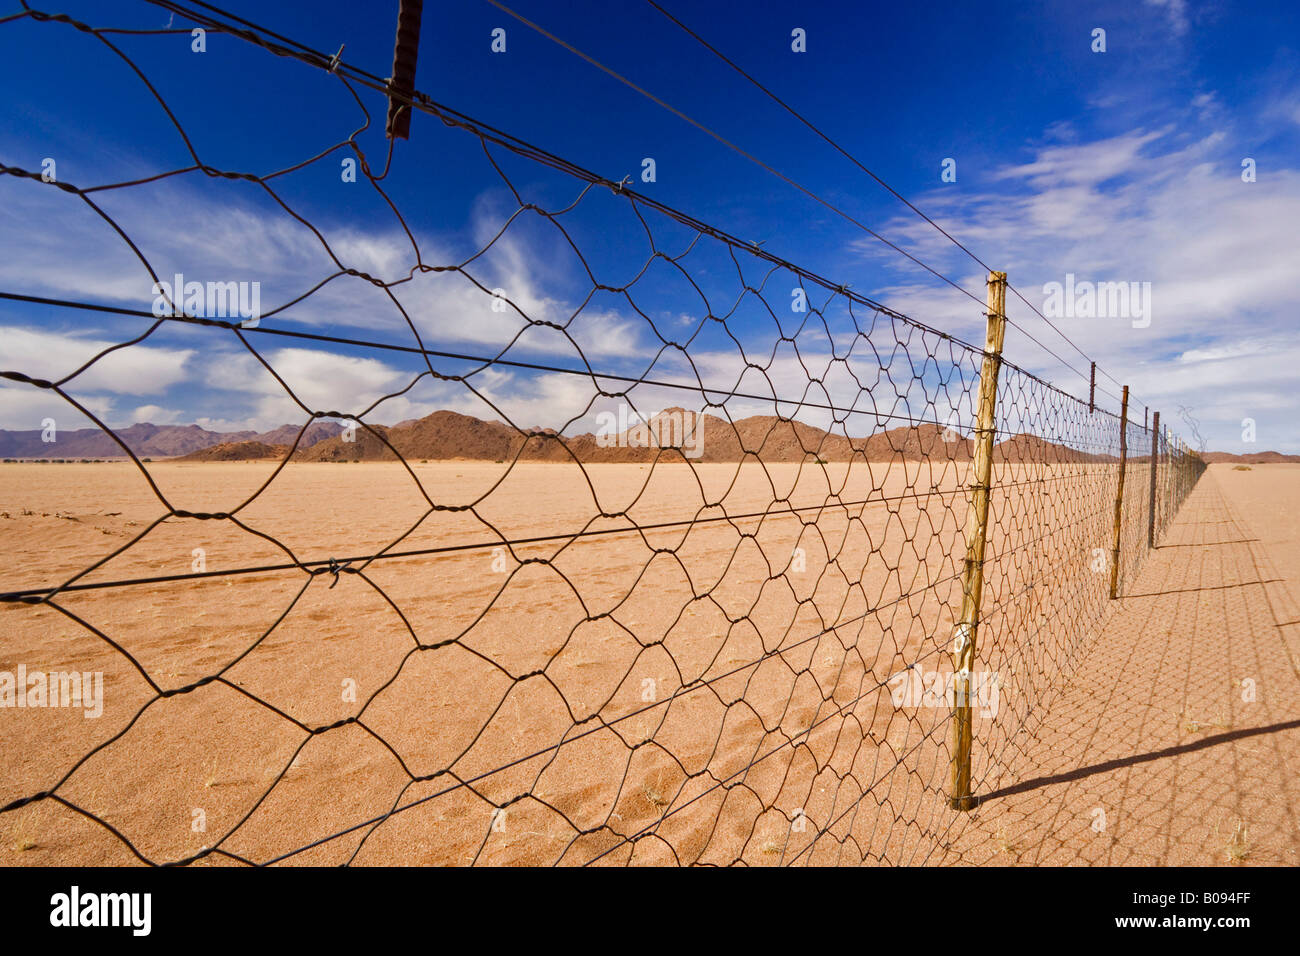 Dead straight farmer's wire fence, chain-link fencing over flat desert sand on the edge of the Namib Desert, Namibia, Africa Stock Photo